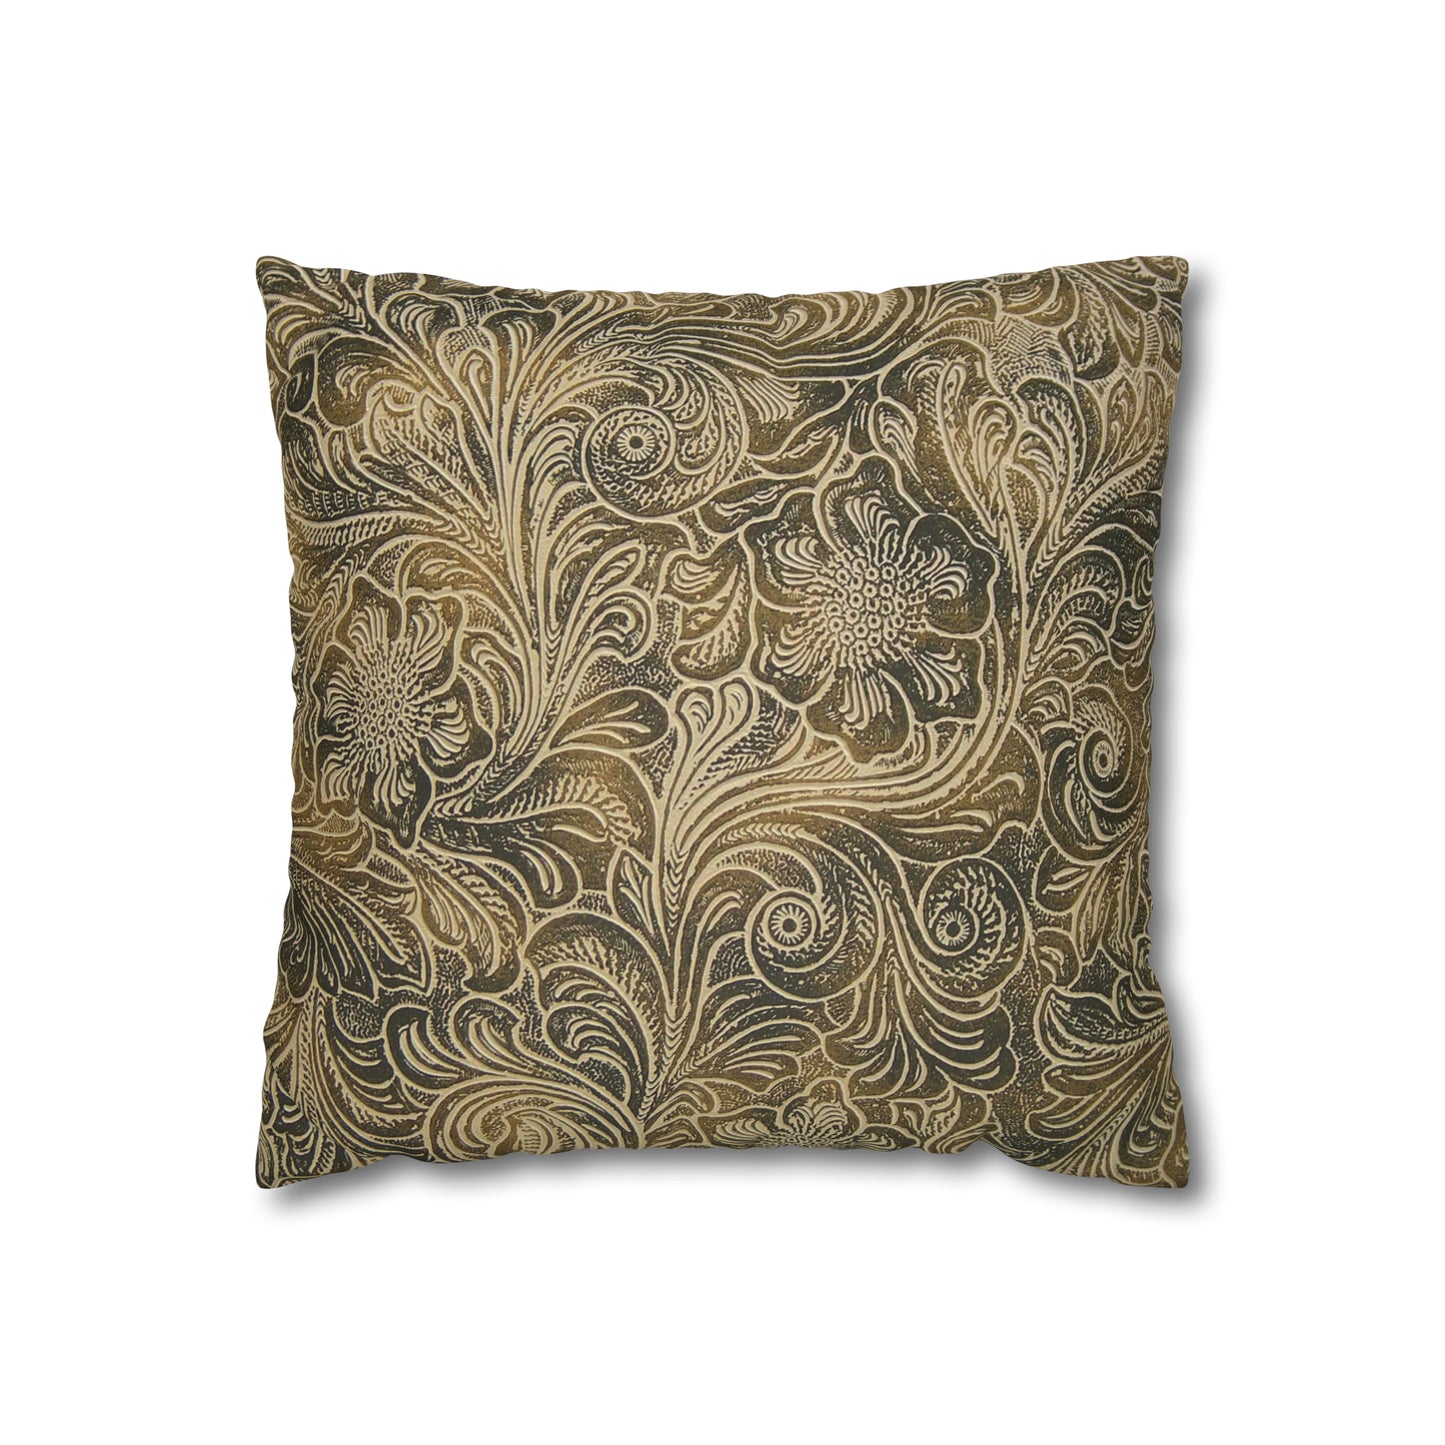 Western Leather Print Faux Suede Pillow Case